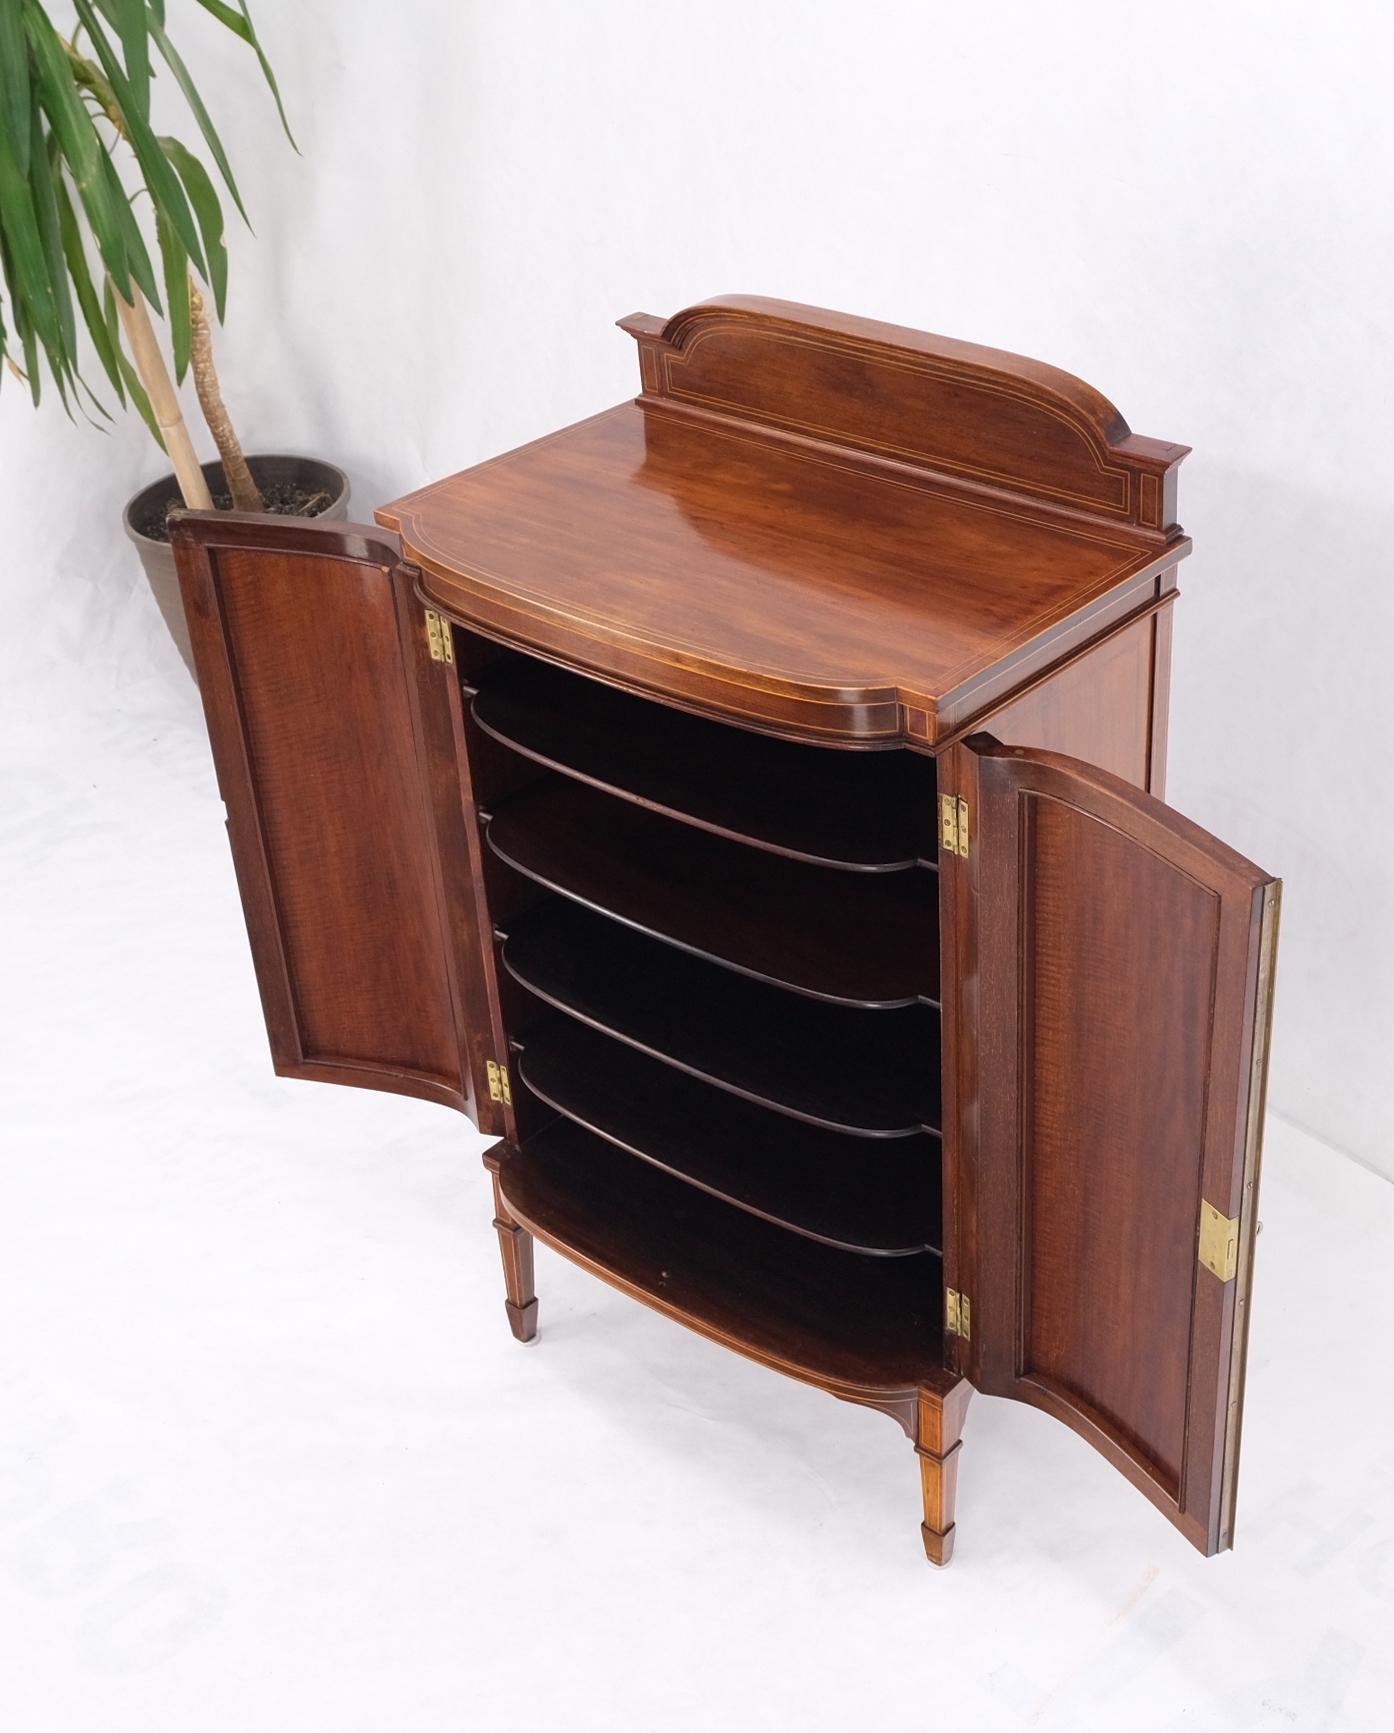 Pencil Inlay Mahogany Bow Front Pull Out Shelves Record Cabinet Storage w/ Key 12